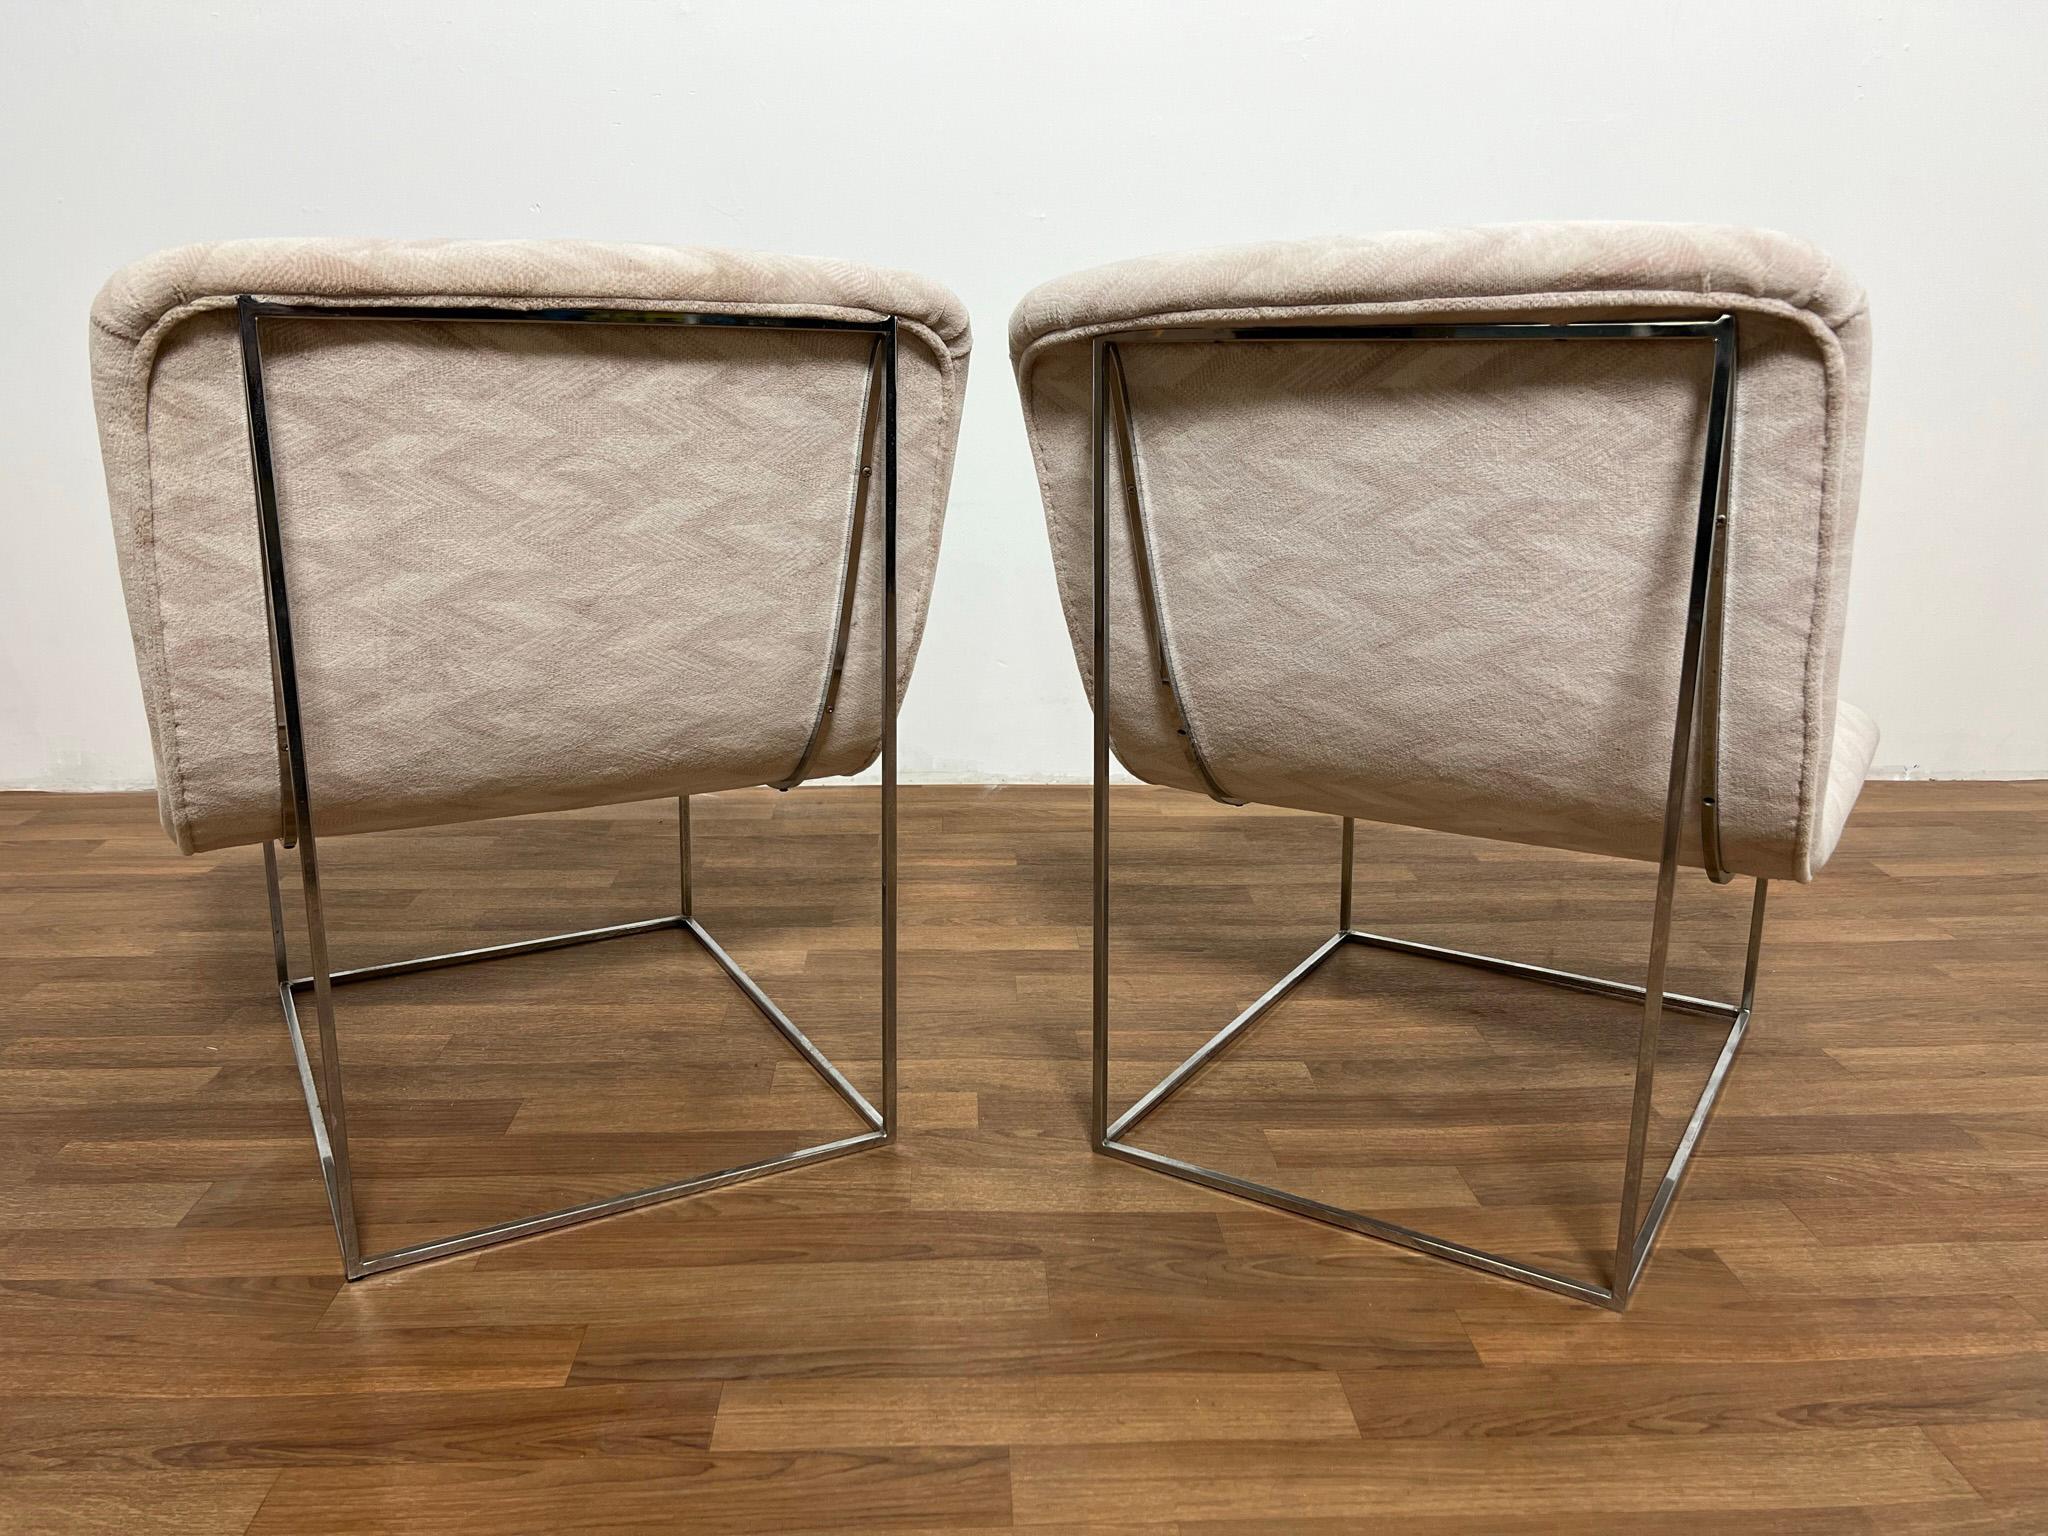 Pair of Milo Baughman Scoop Form Slipper Lounge Chairs Circa 1970s In Good Condition For Sale In Peabody, MA